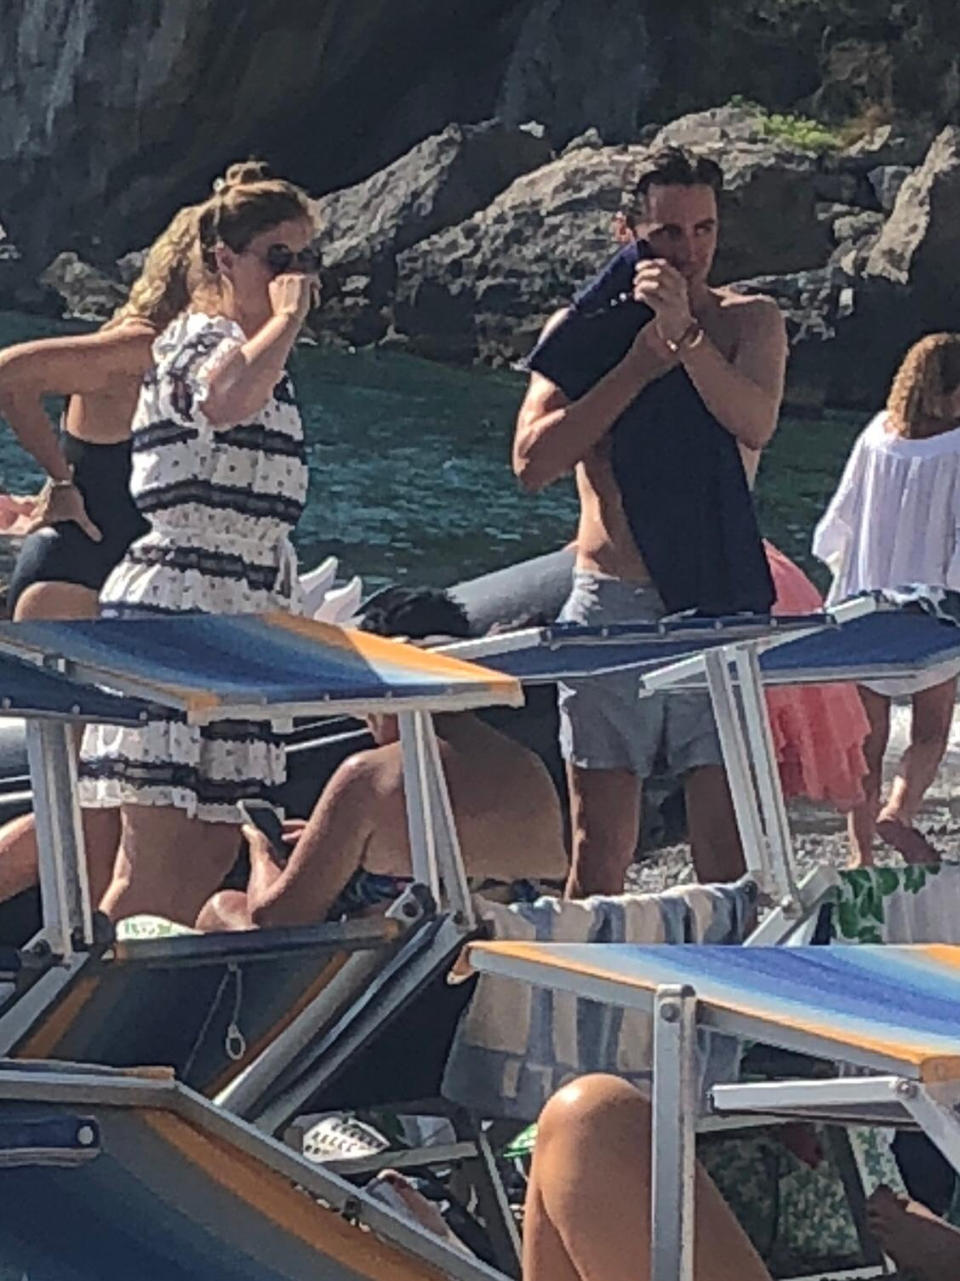 Rumours are swirling the couple could marry in Italy [Photo: SWNS]